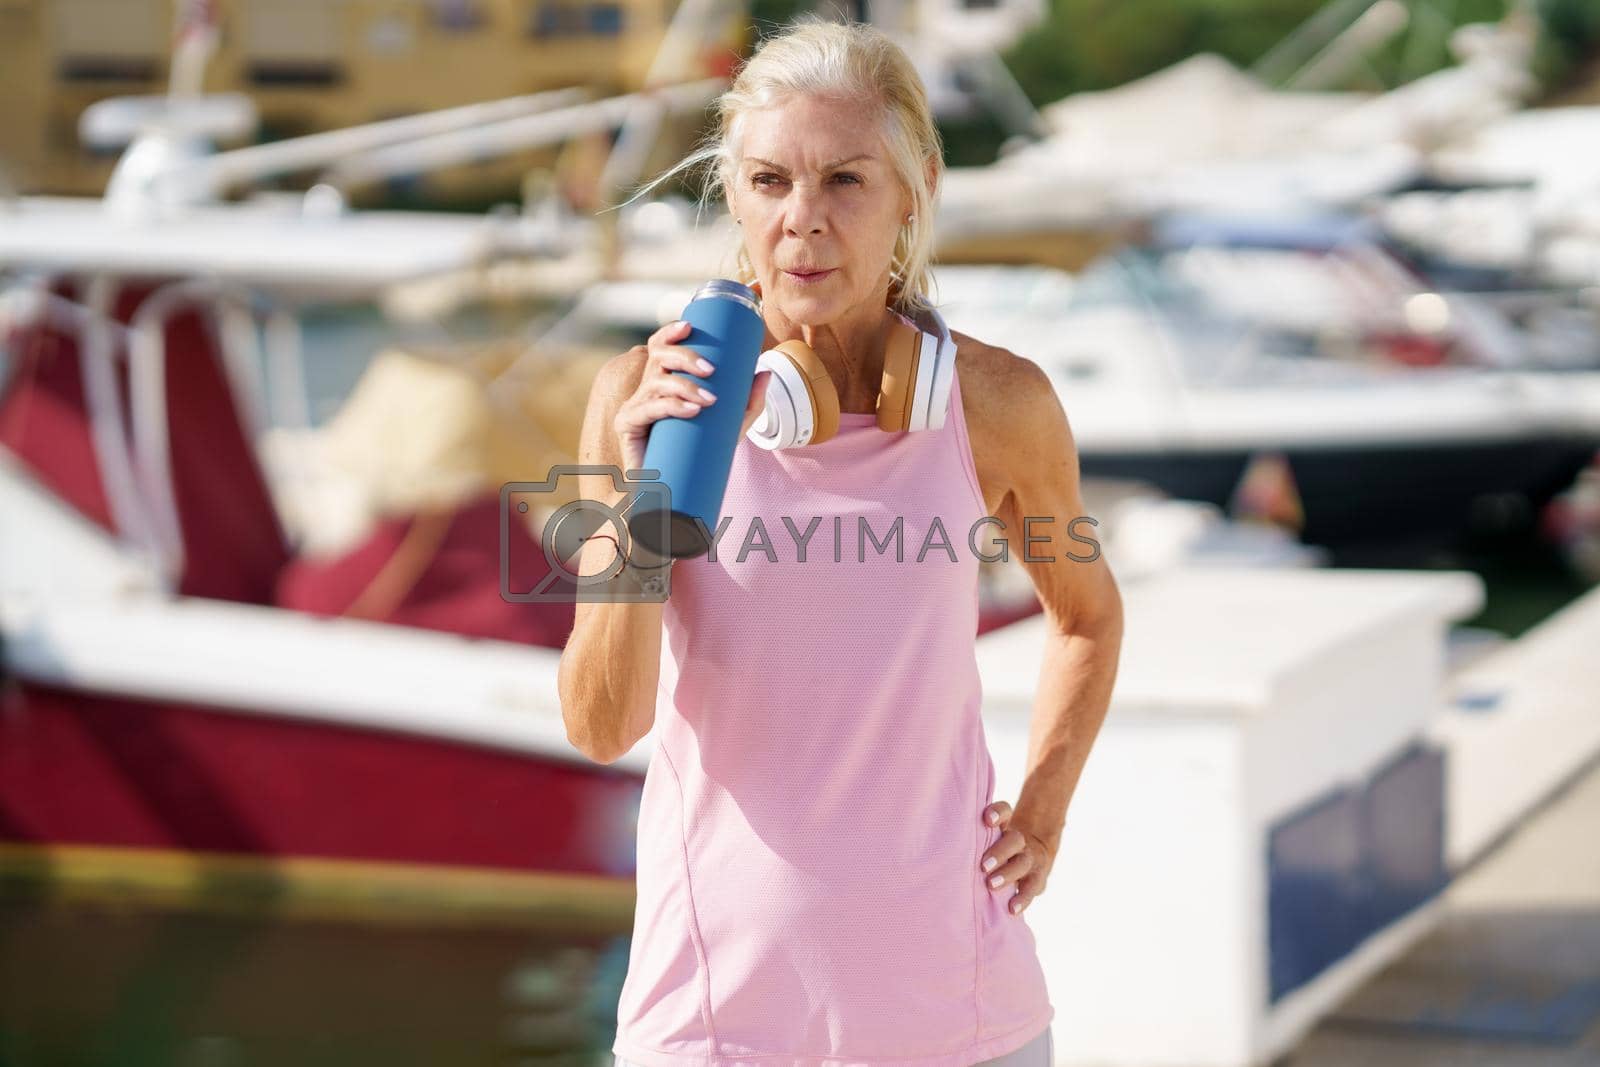 Mature sportswoman taking a break during exercise to hydrate herself. Senior woman in fitness clothing drinking water from a metal fitness bottle. Concept of healthy living in the elderly.